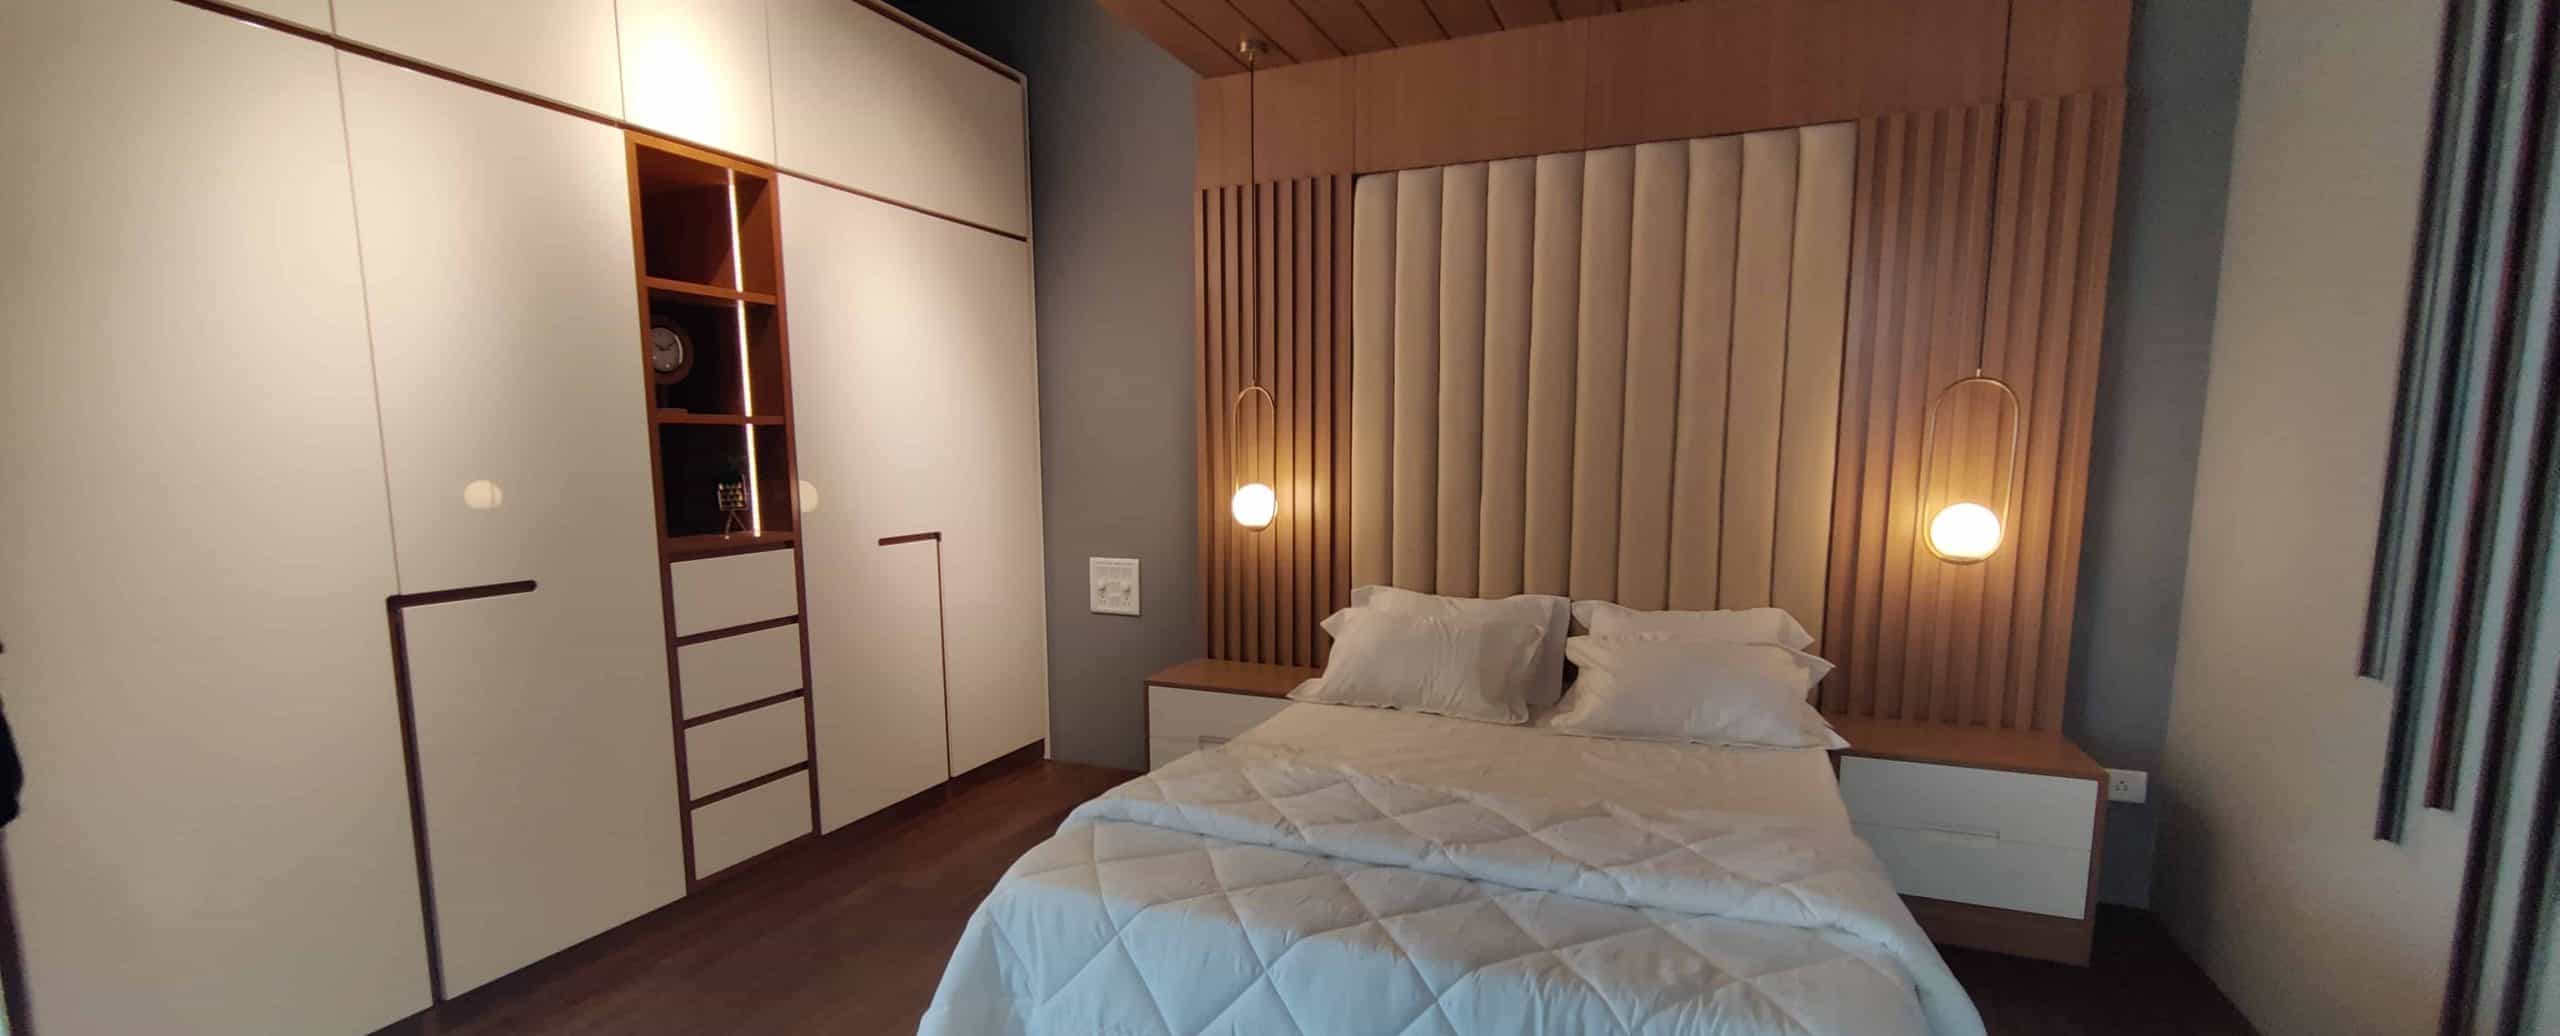 aristo wardrobes for bedroom in bangalore by dealers